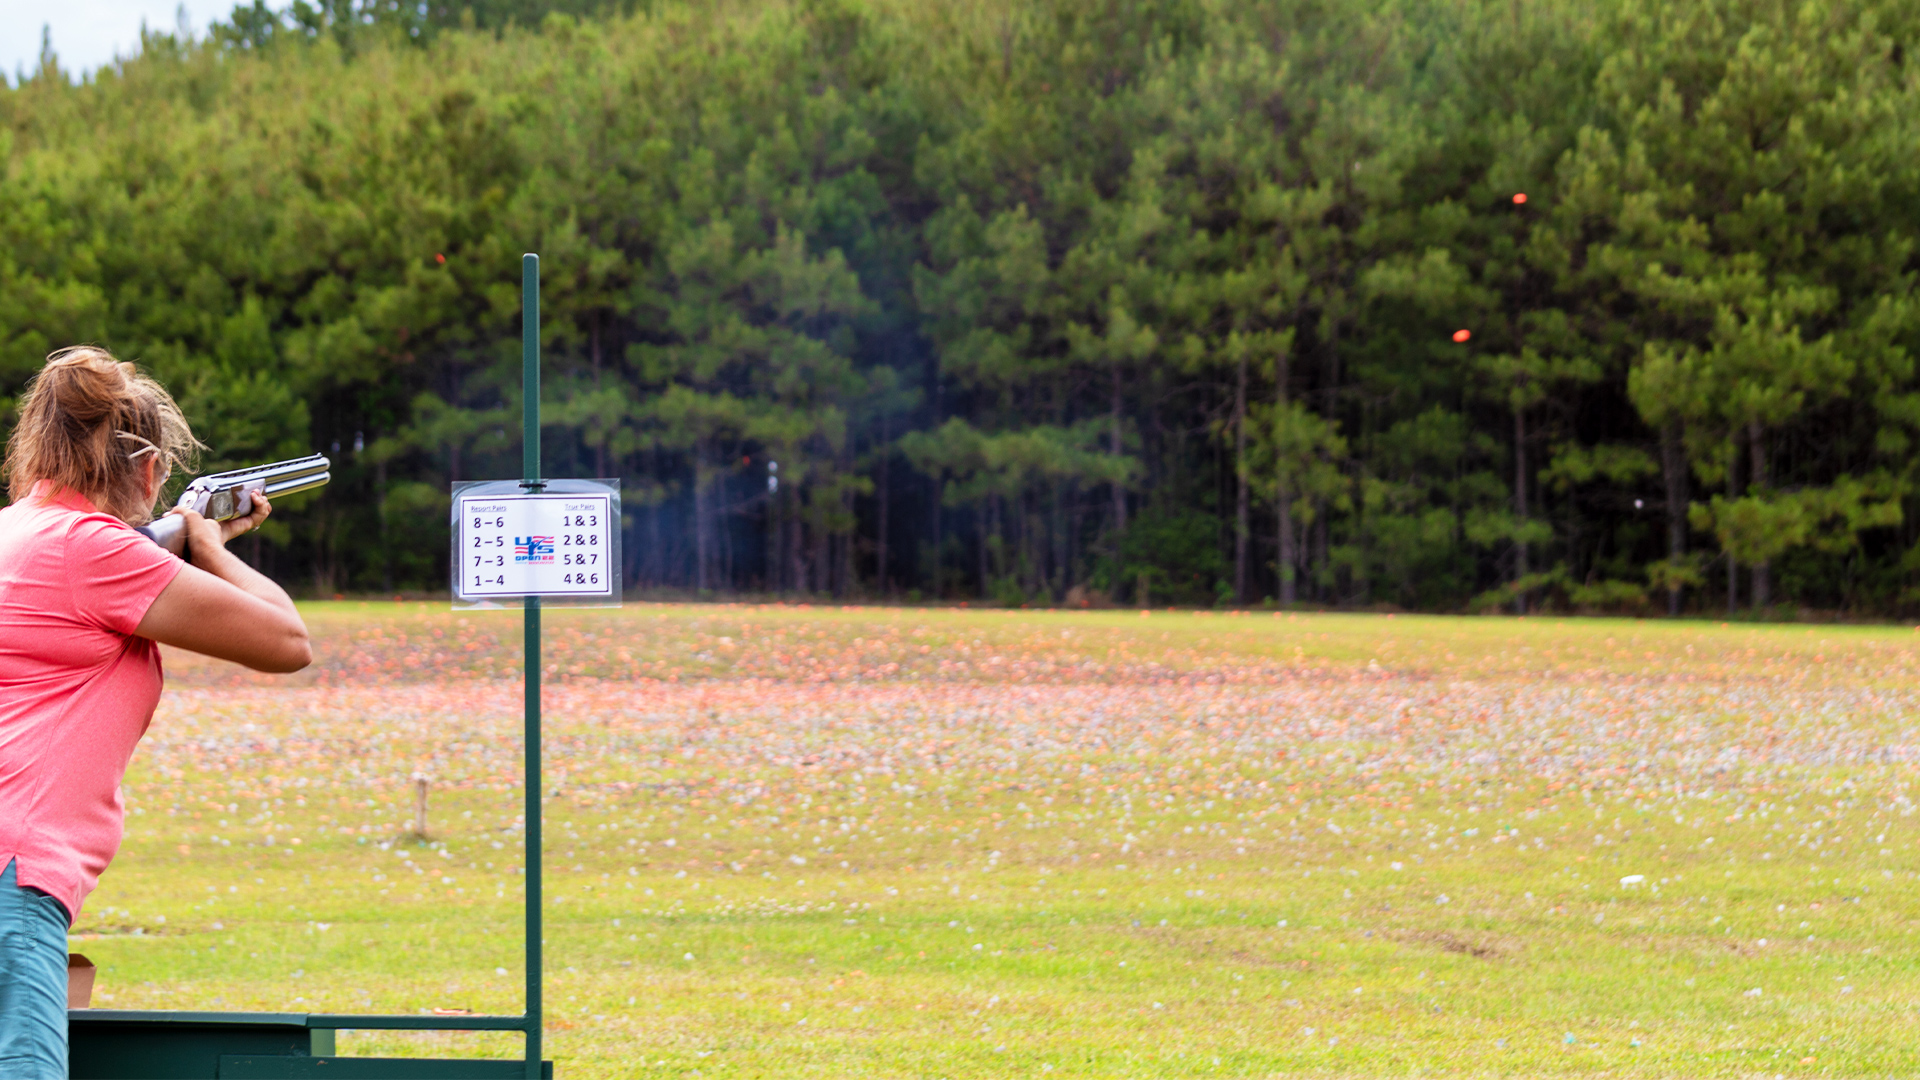 US Open competition for sporting clays